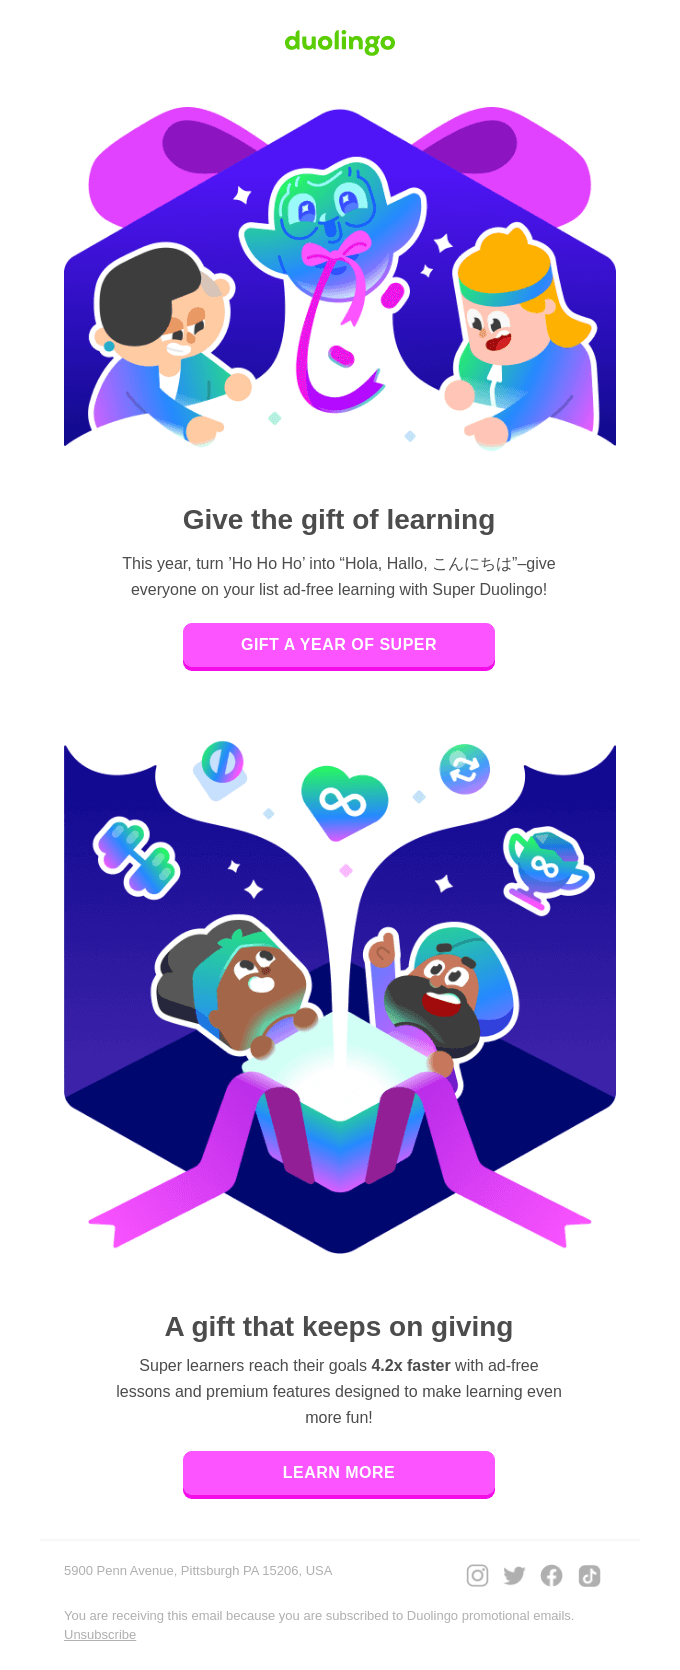 🎁 Give the gift of Super Duolingo